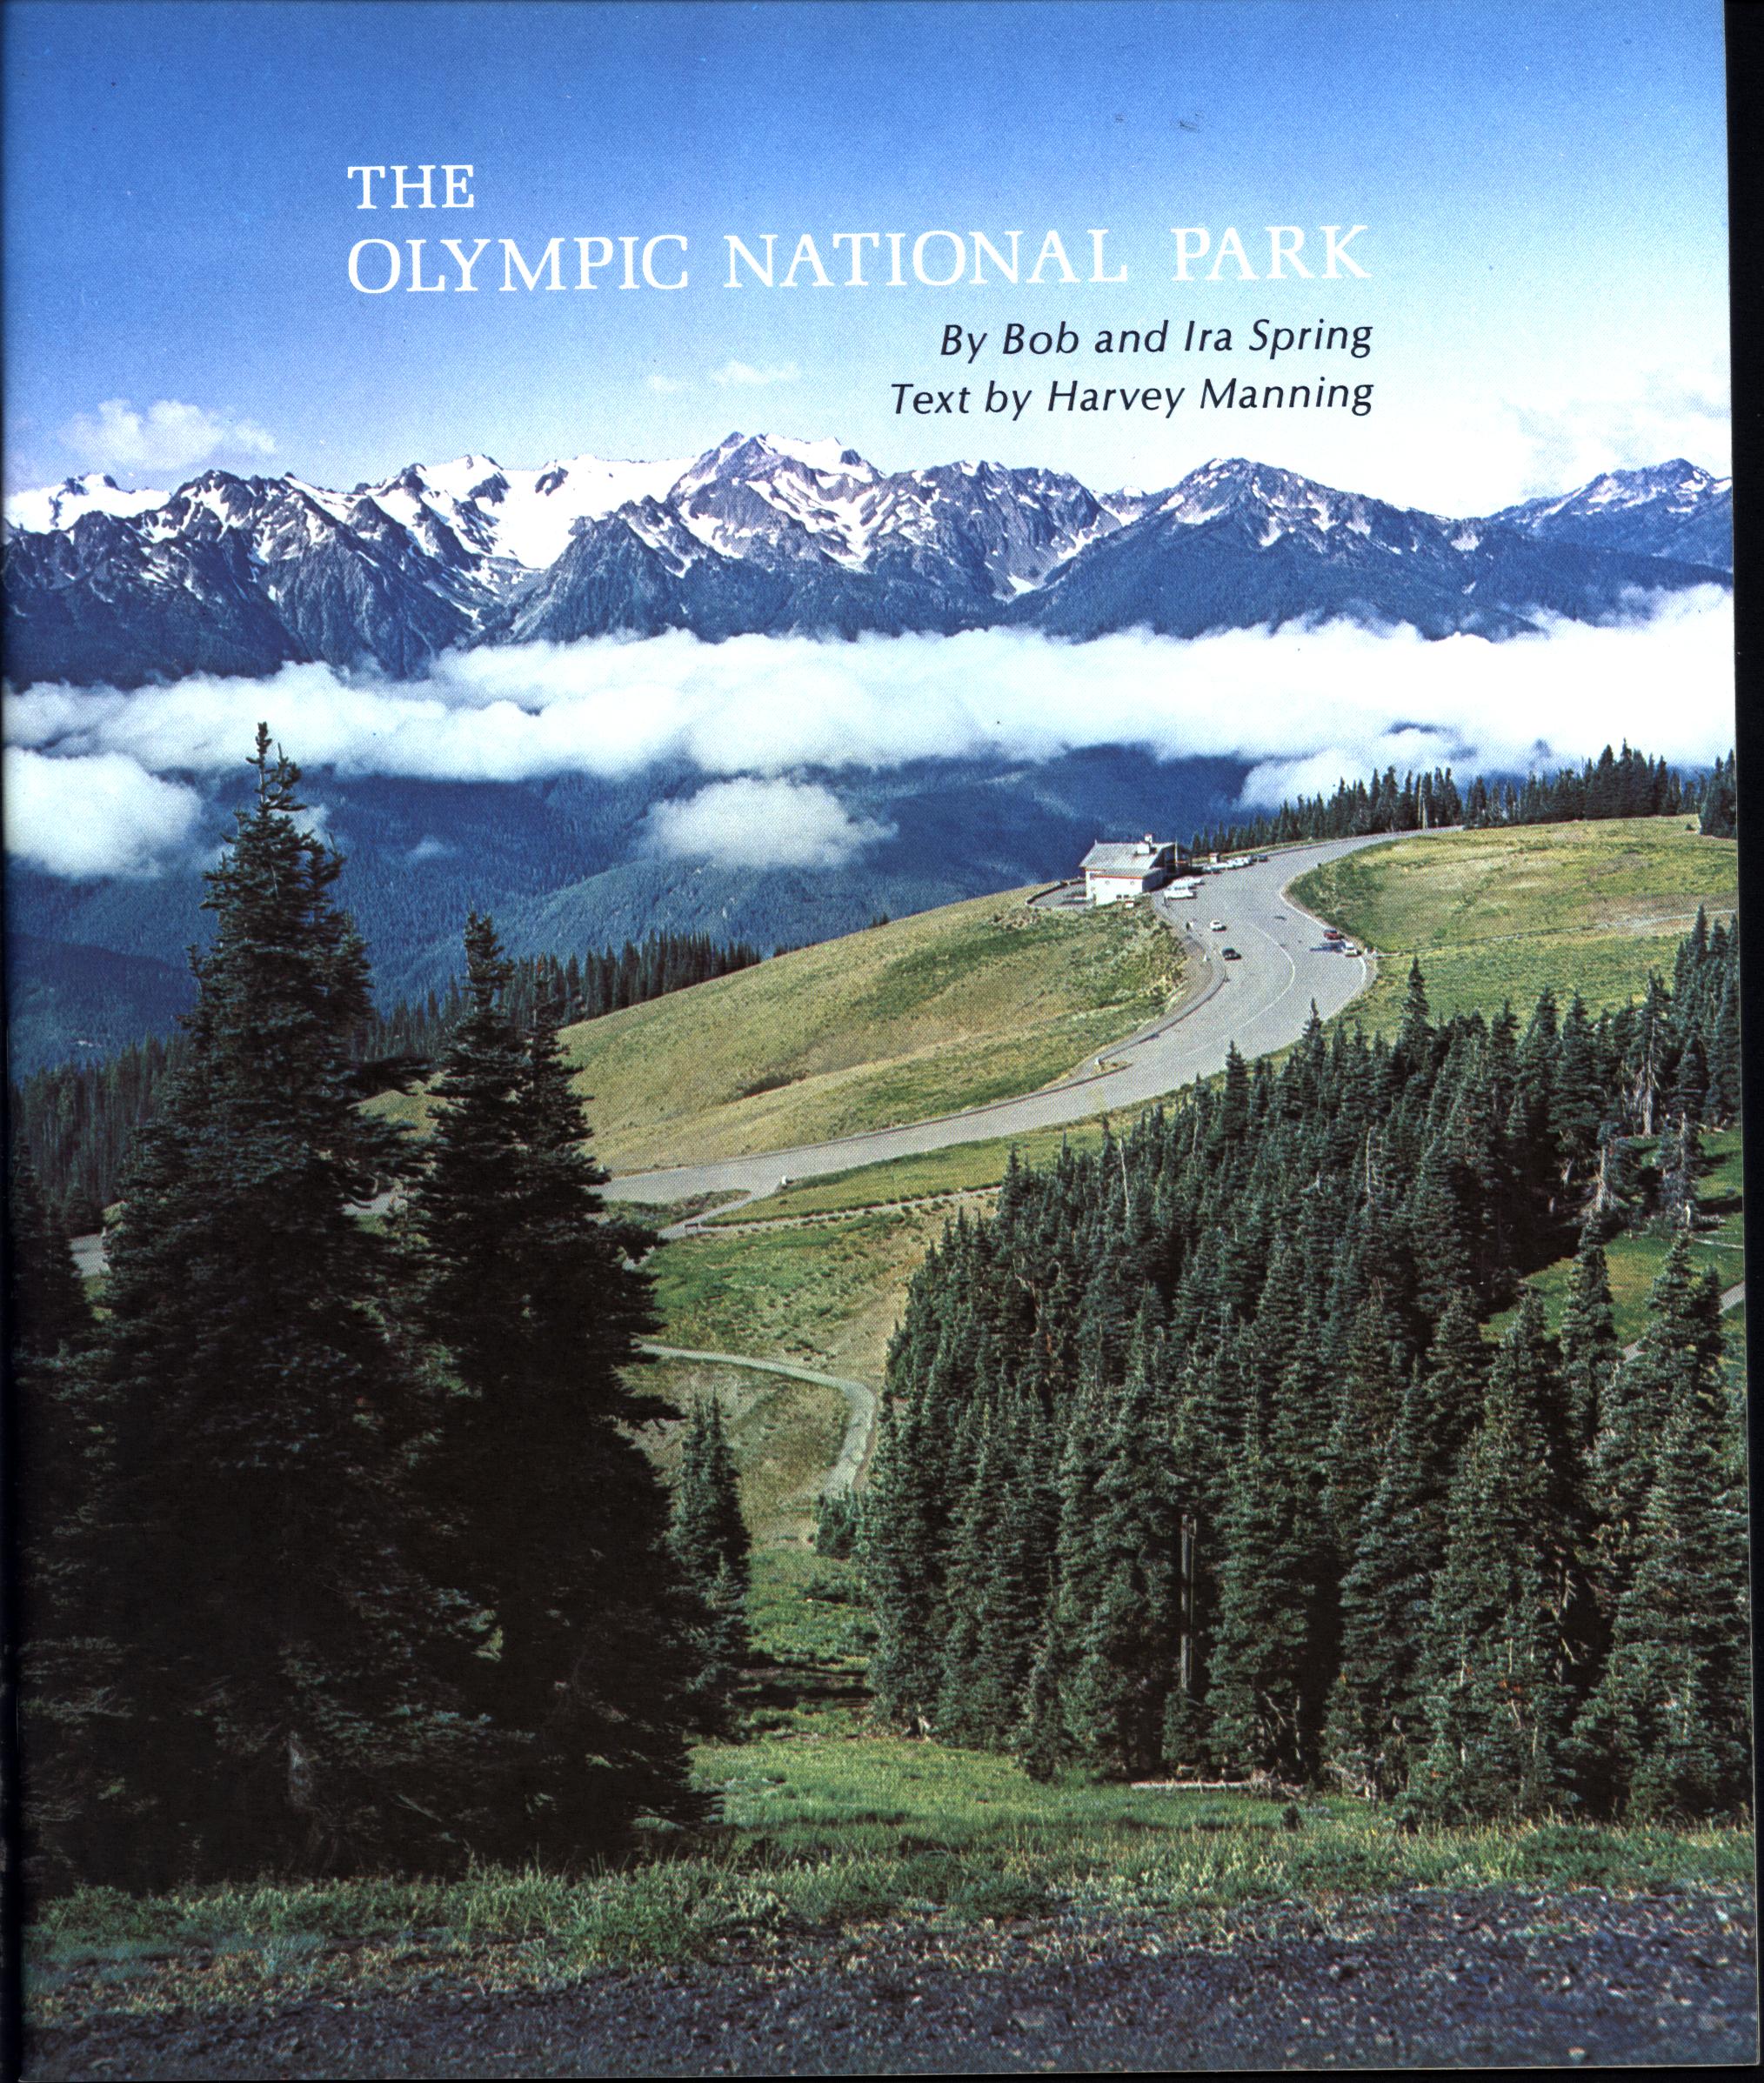 THE OLYMPIC NATIONAL PARK. 